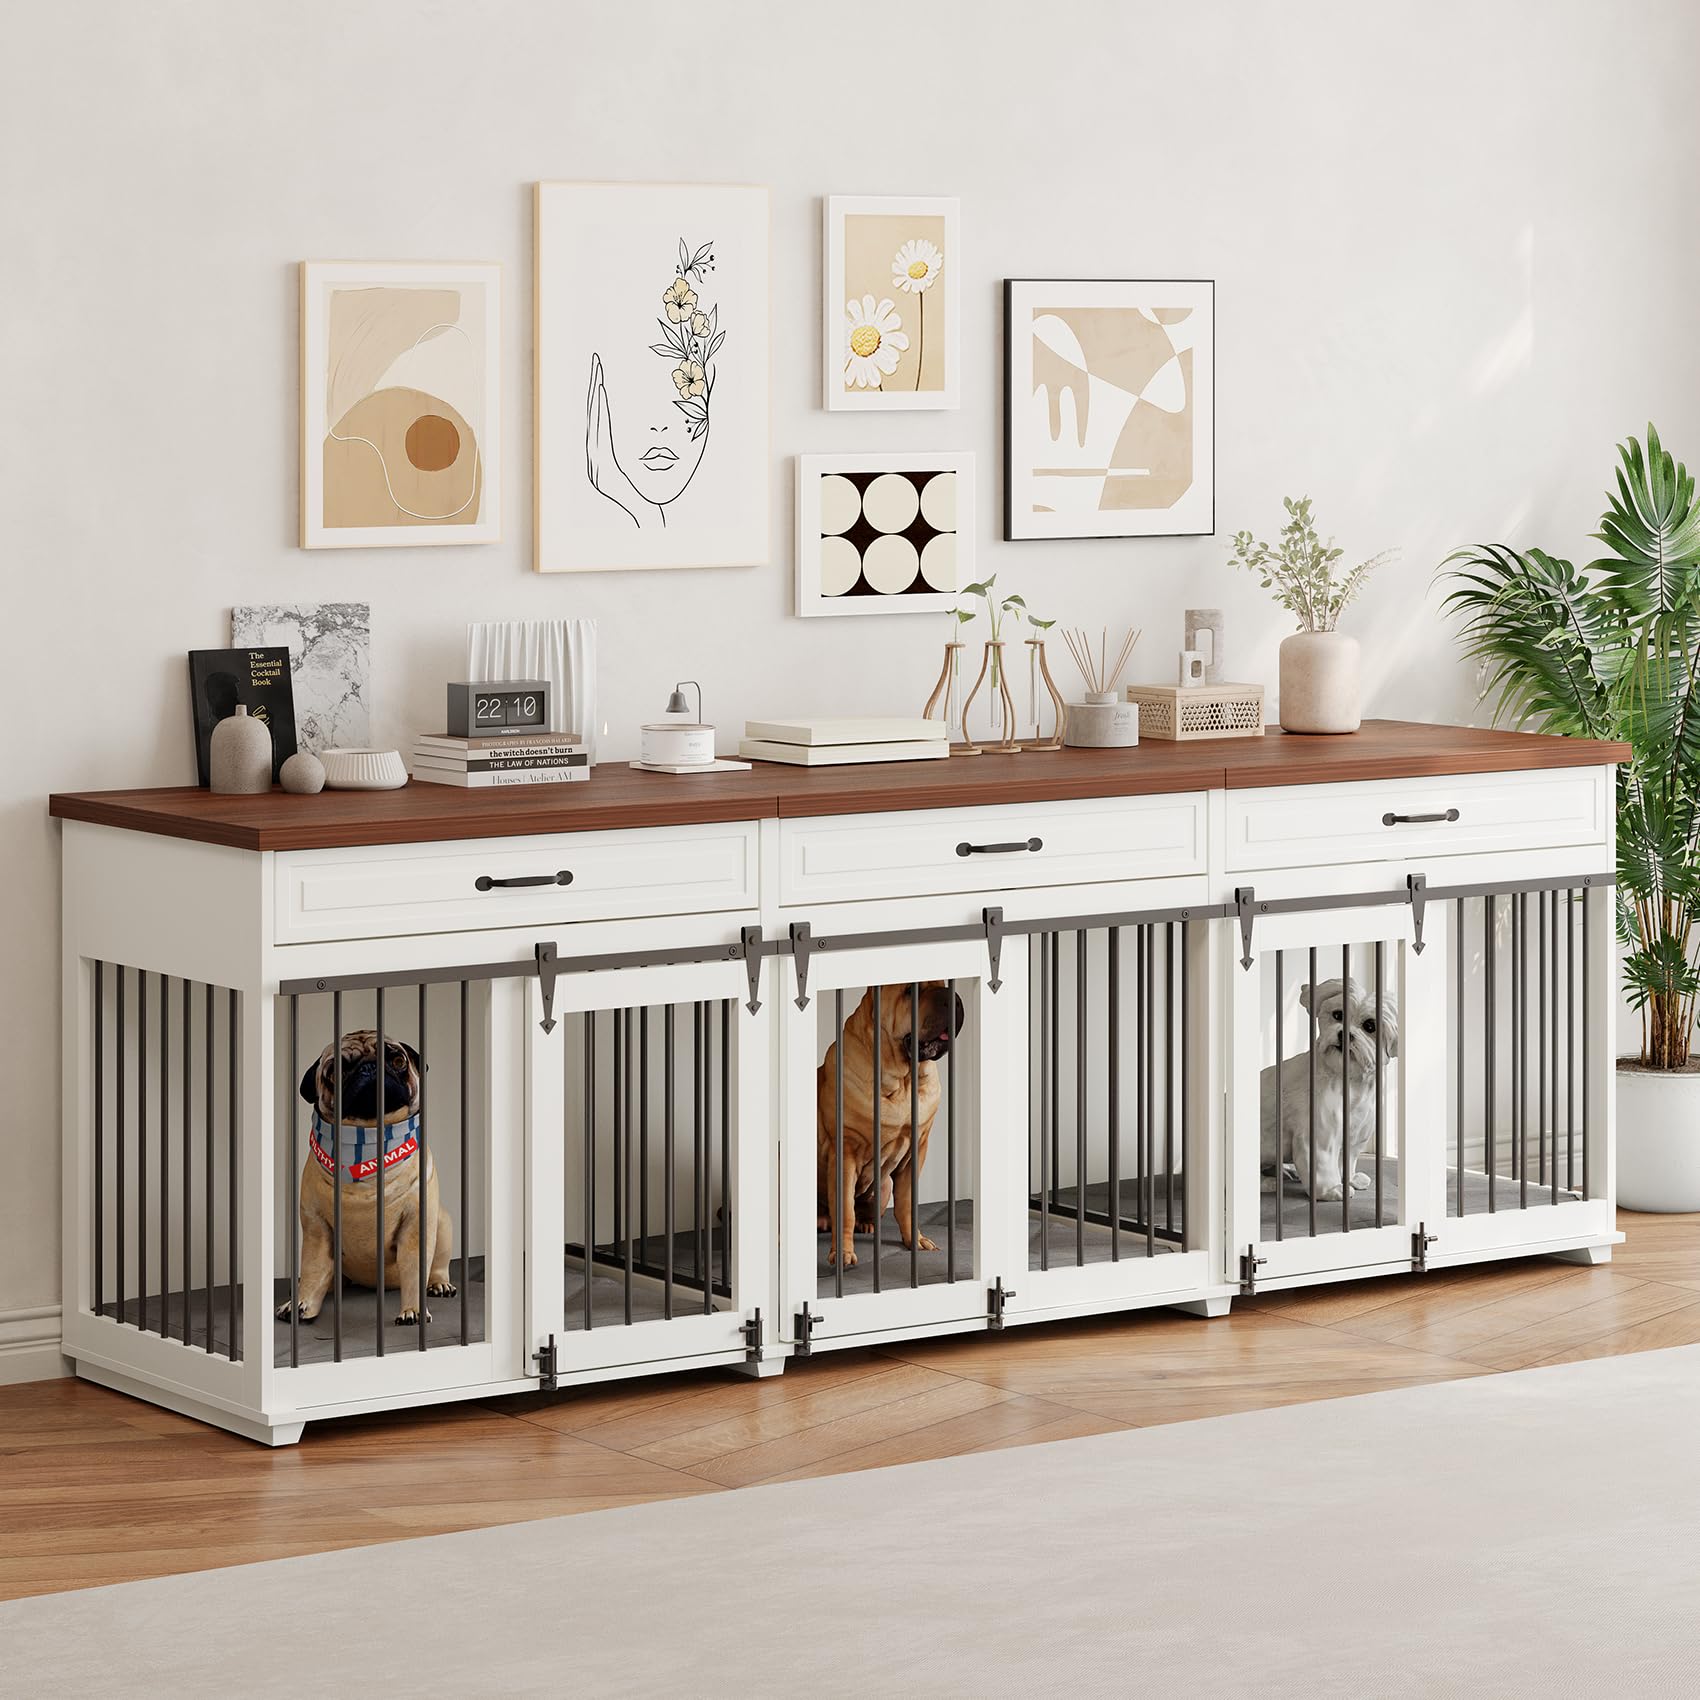 Dog Crate Furniture - Indoor Wooden Dog Kennel Crate with 3 Lockable Sliding Barn Doors, 2 Dividers, 3 Drawers, 95